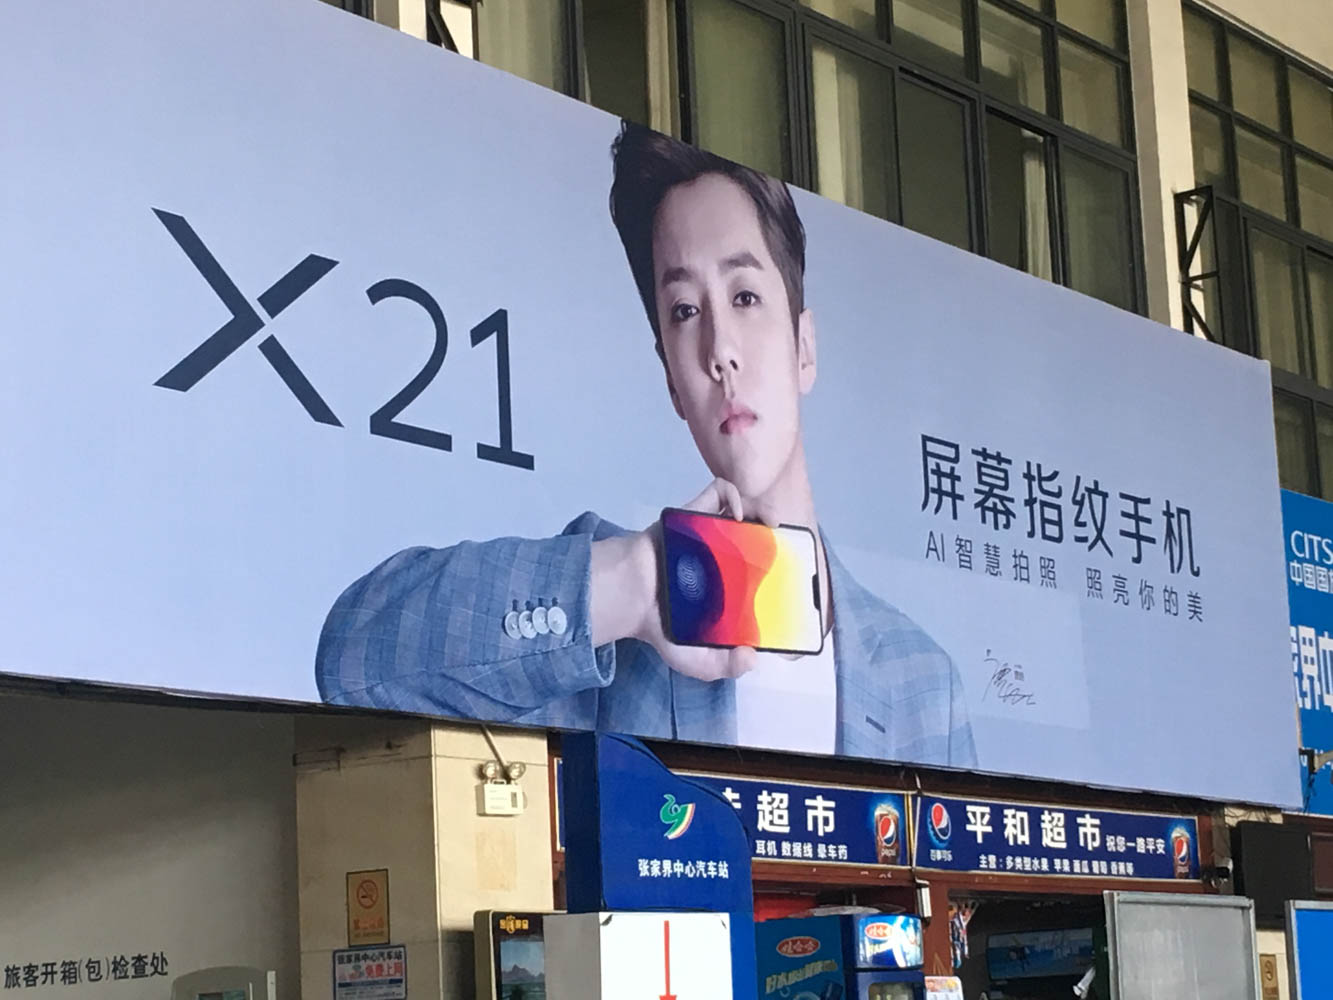 That looks a lot like the iPhone X